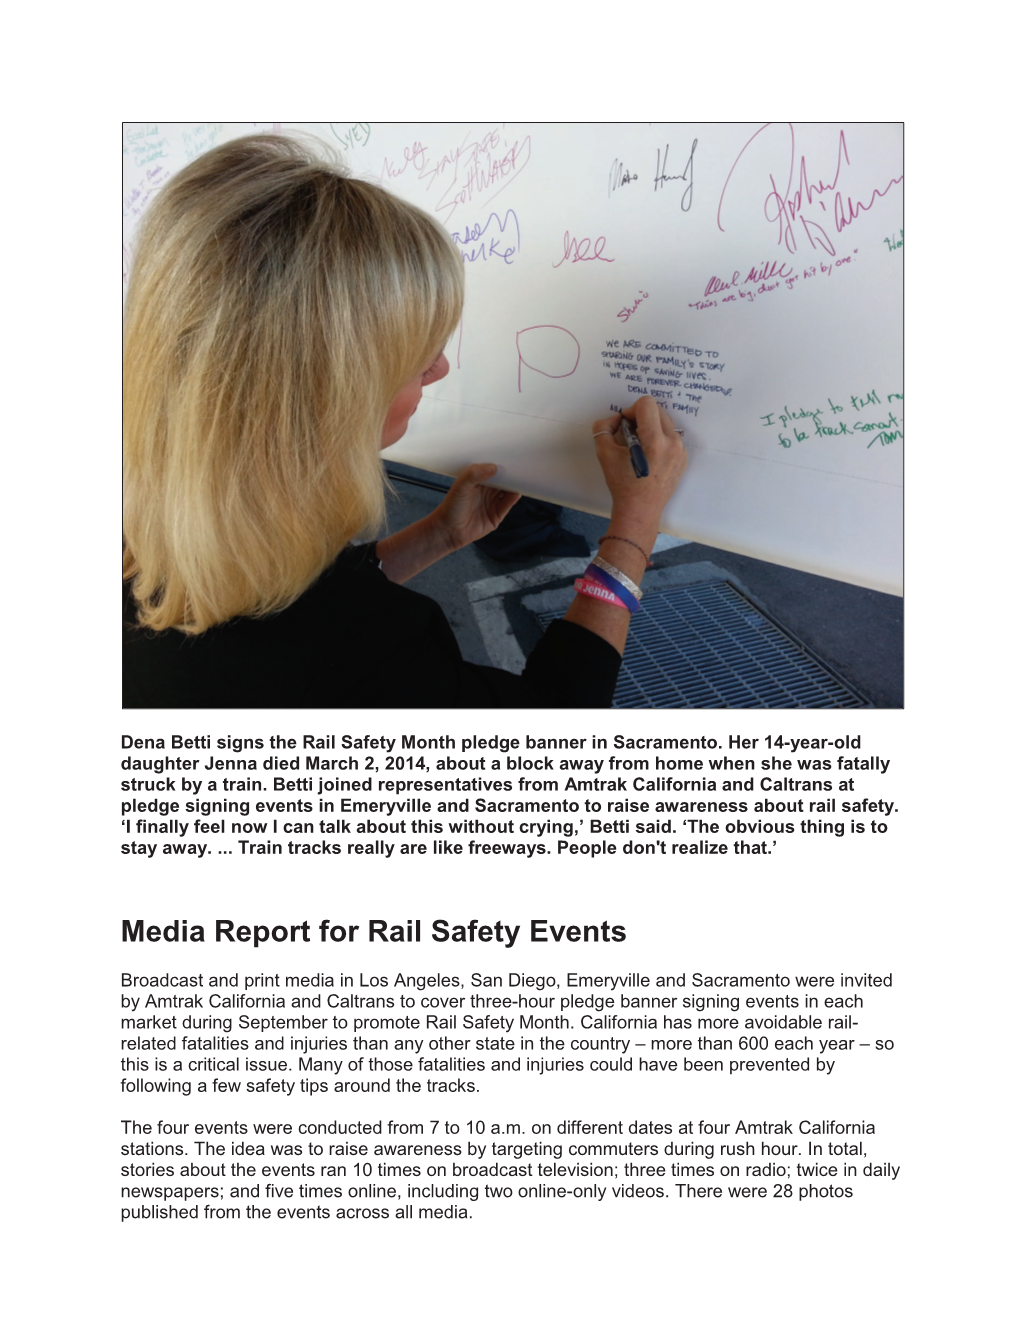 Media Report for Rail Safety Events